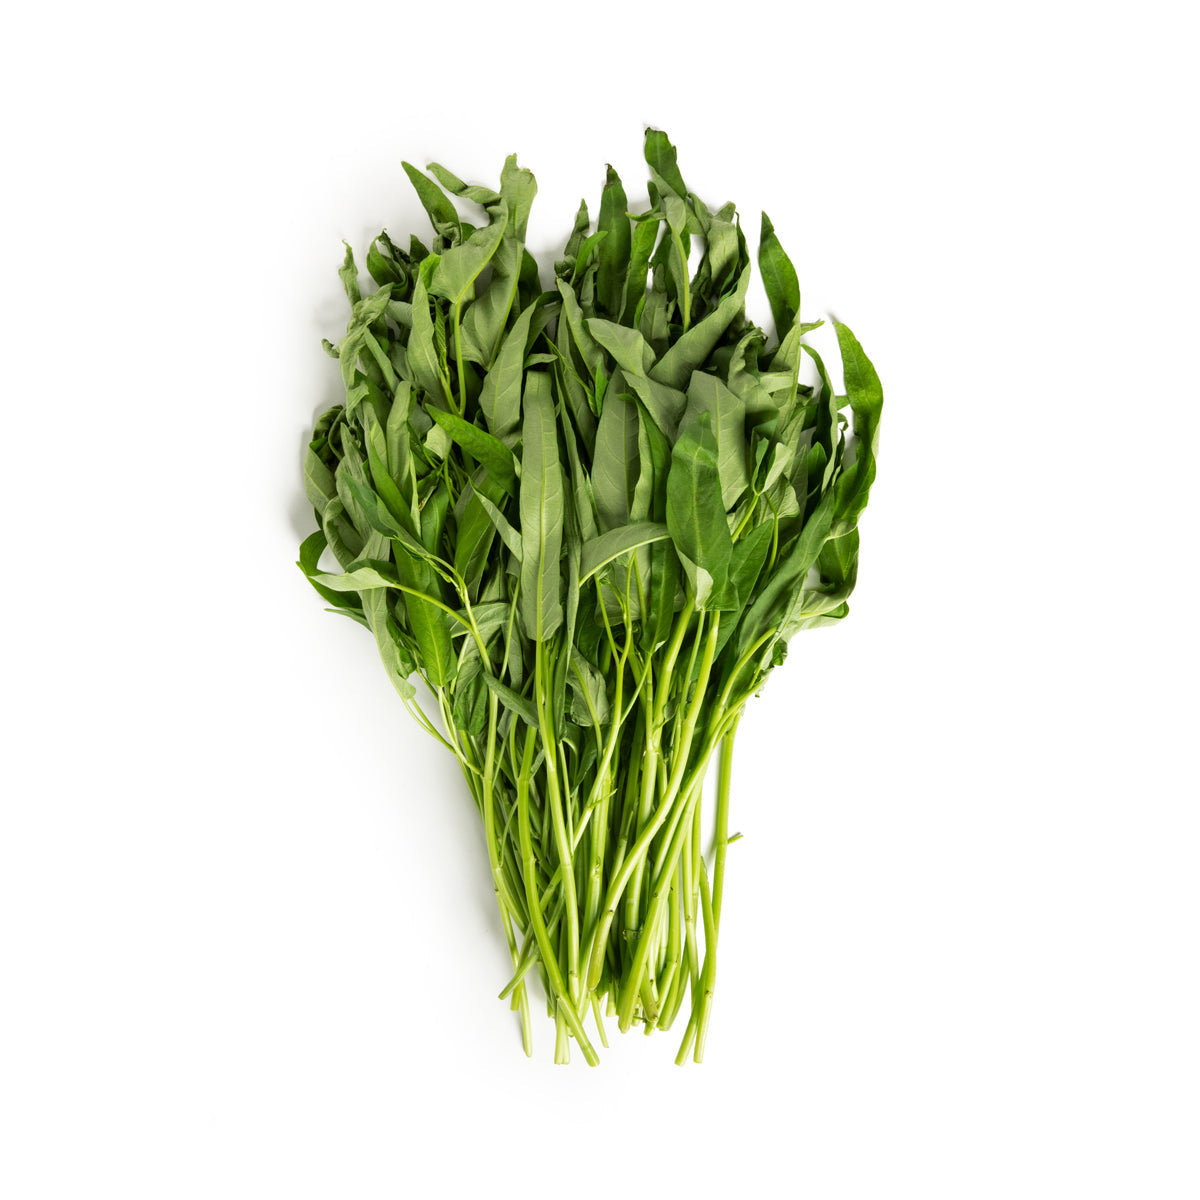 B&W Water Spinach 5 lb